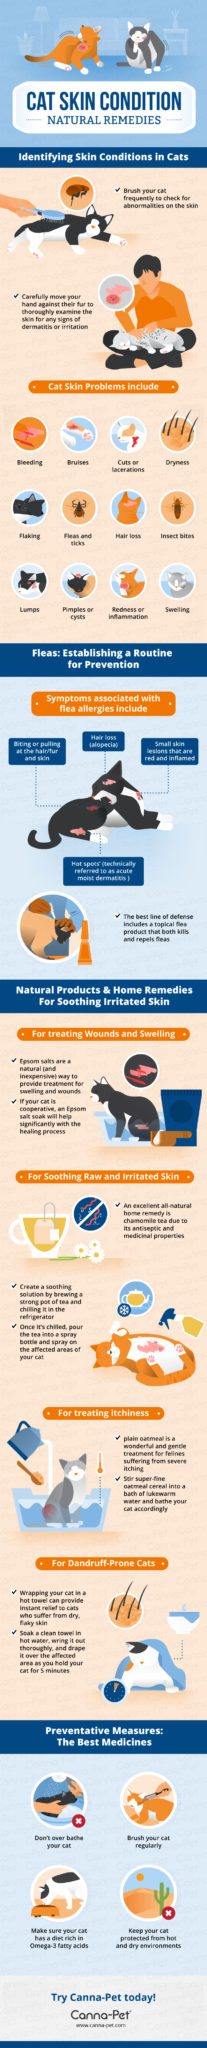 Cat Skin Conditions and Natural Remedies Infographic